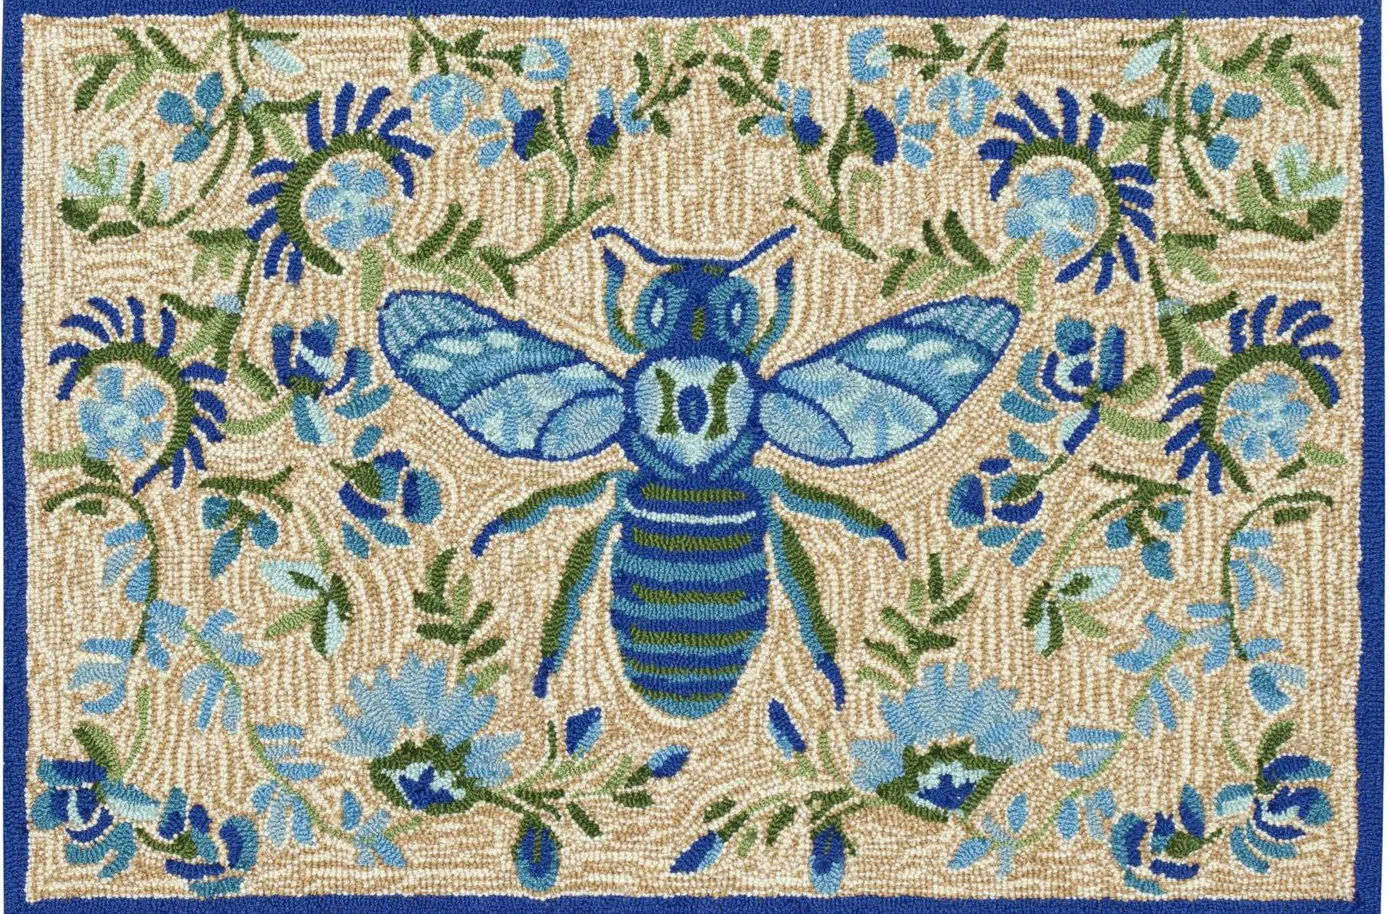 Frontporch Flora Bee Rug in Blue/natural by Trans-Ocean Import Co Inc